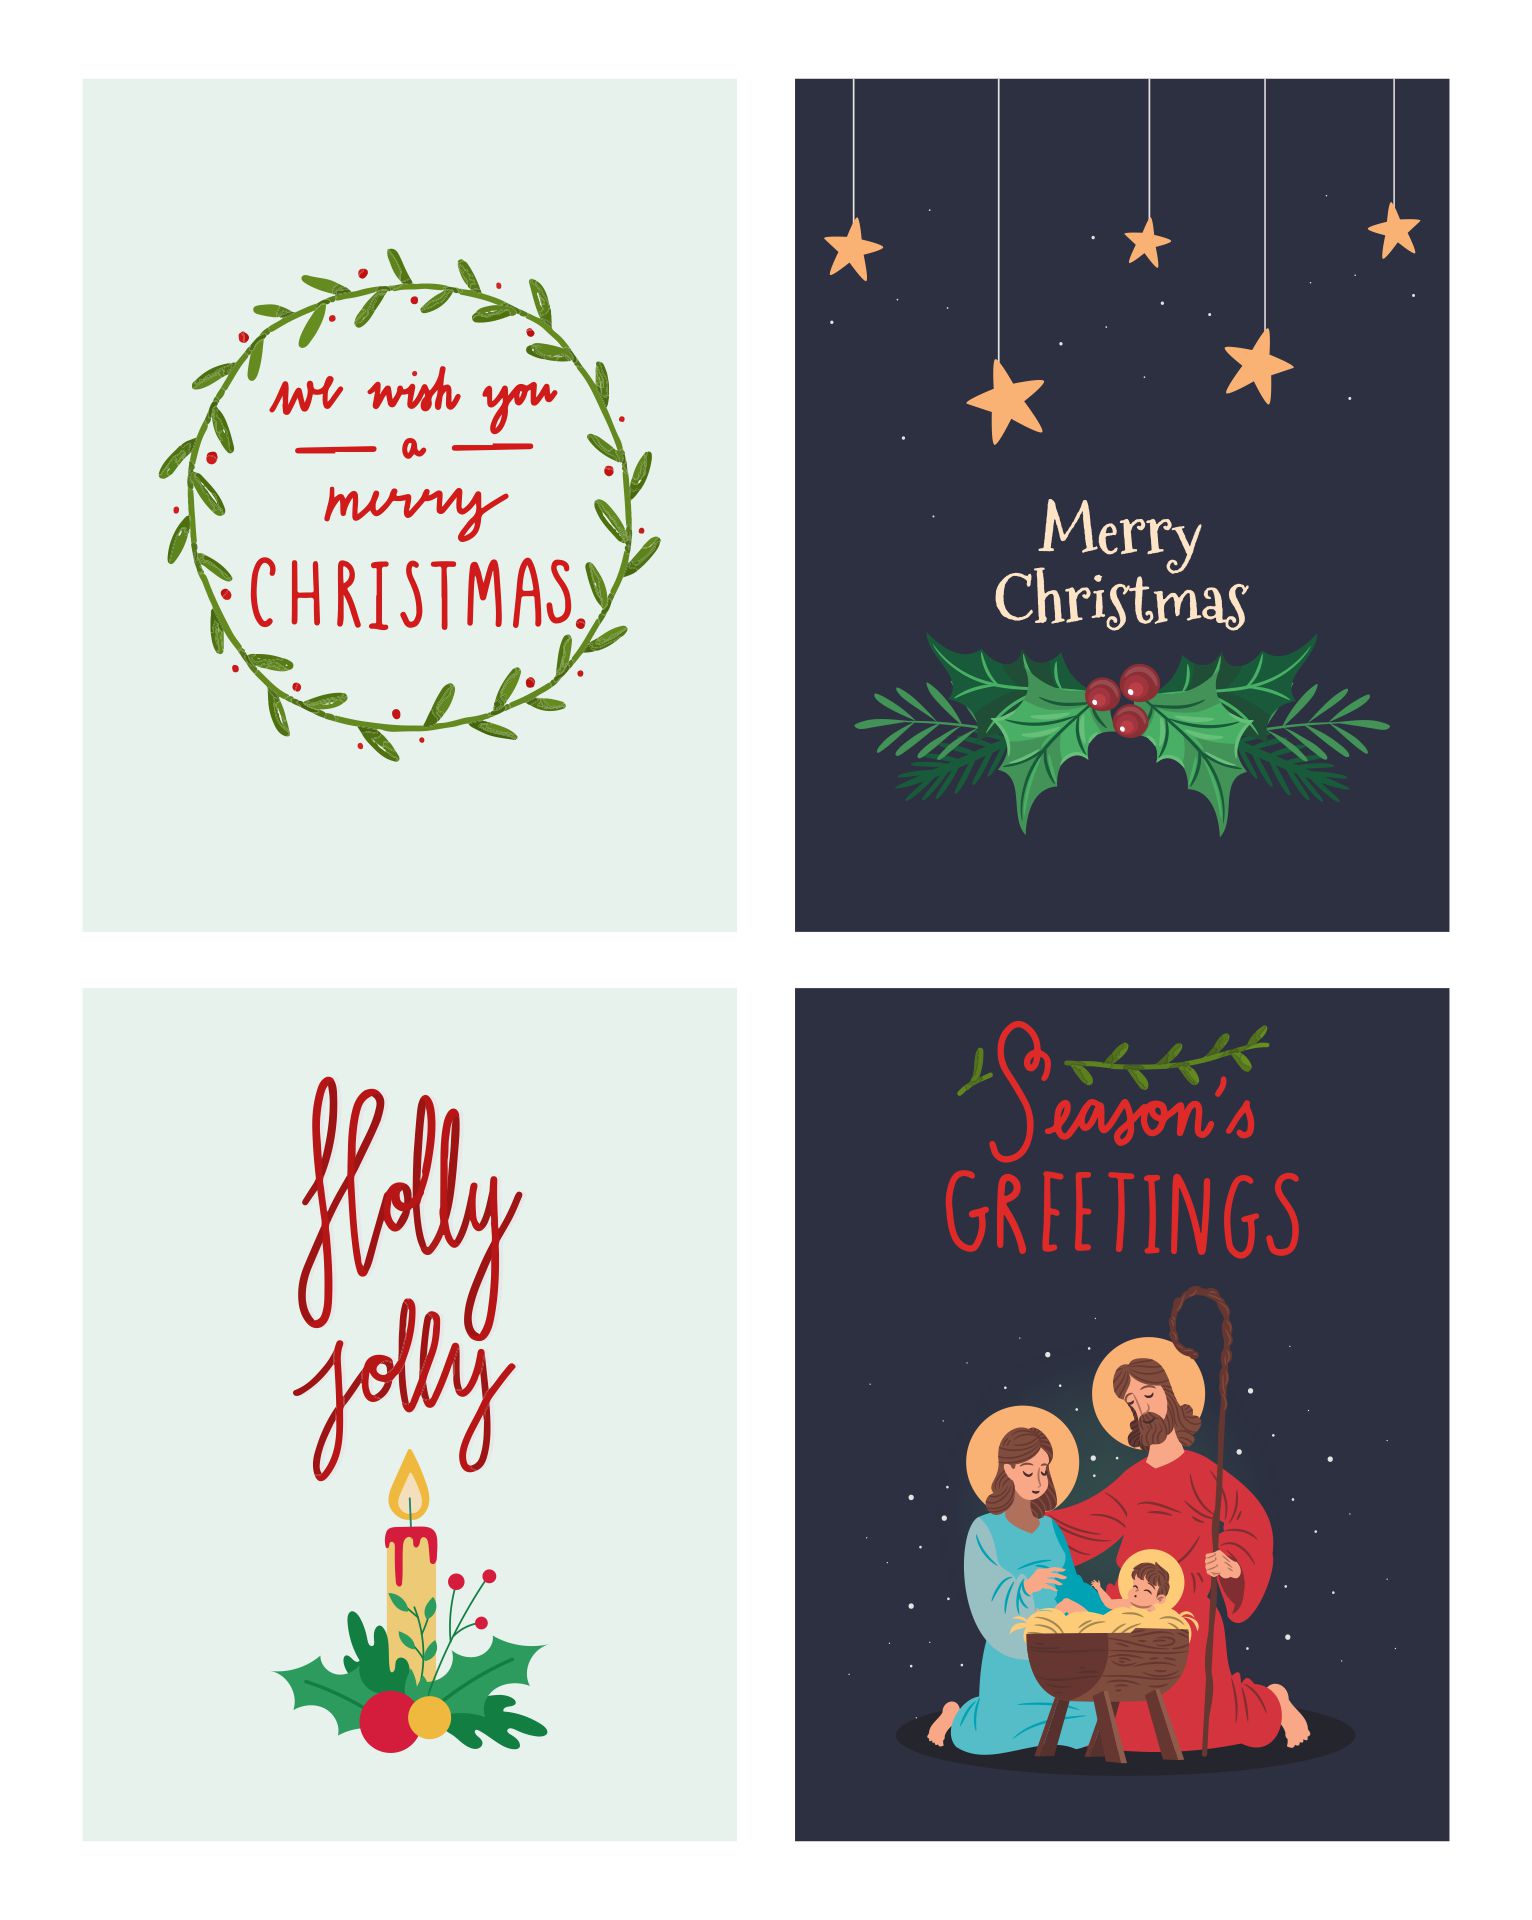 Christian Greeting Cards & Gifts